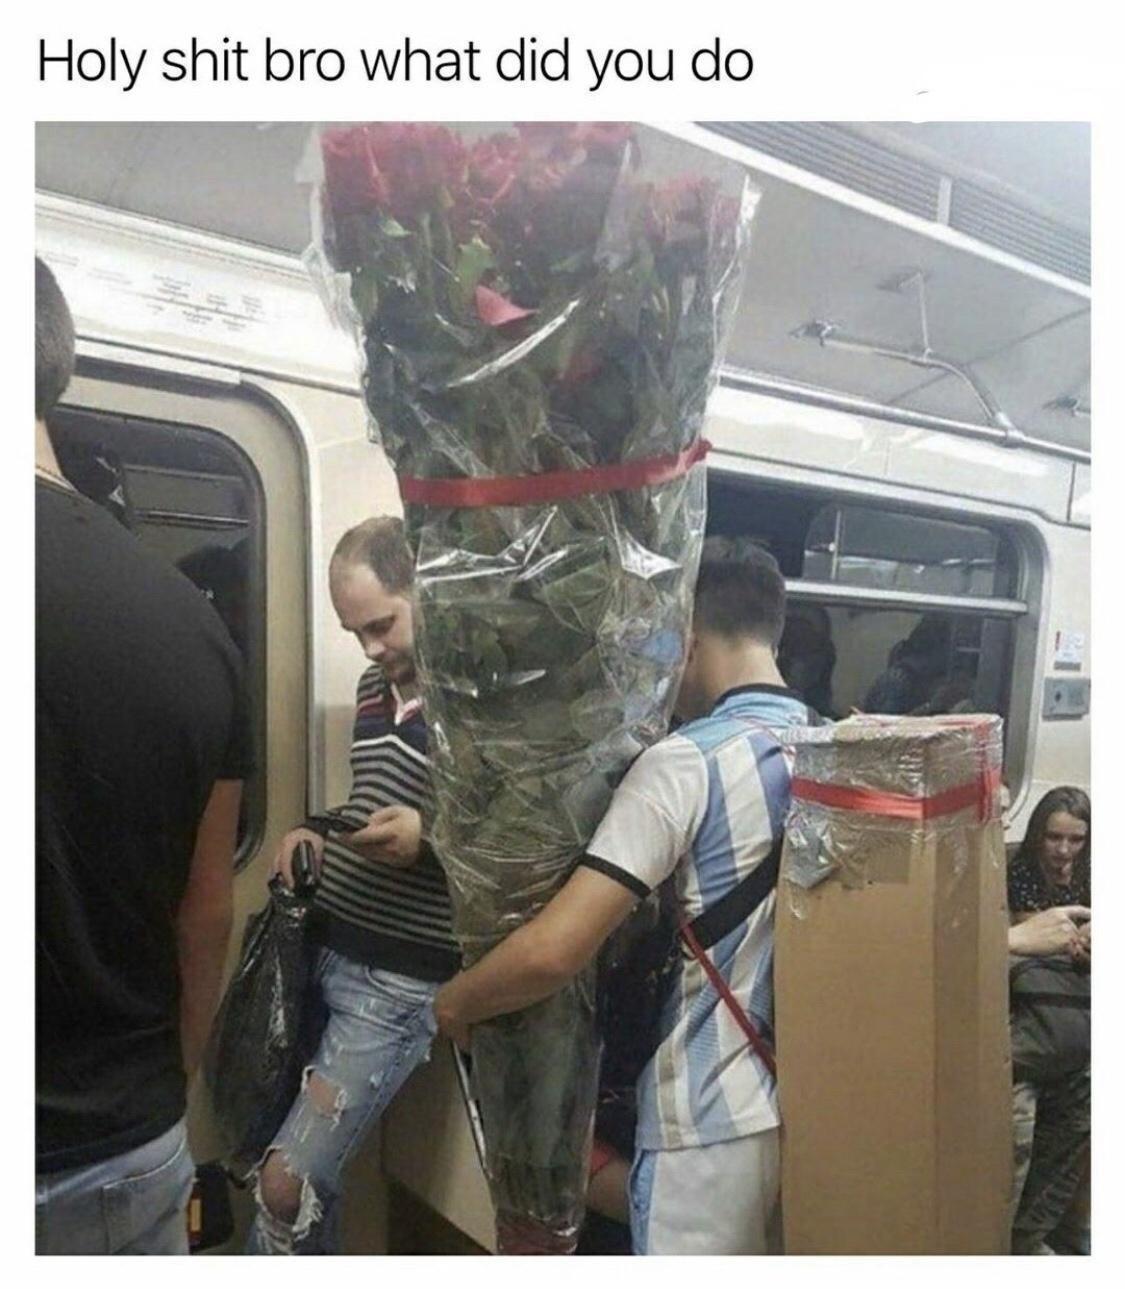 holy shit bro what did you do, giant rose bouquet in public transportation